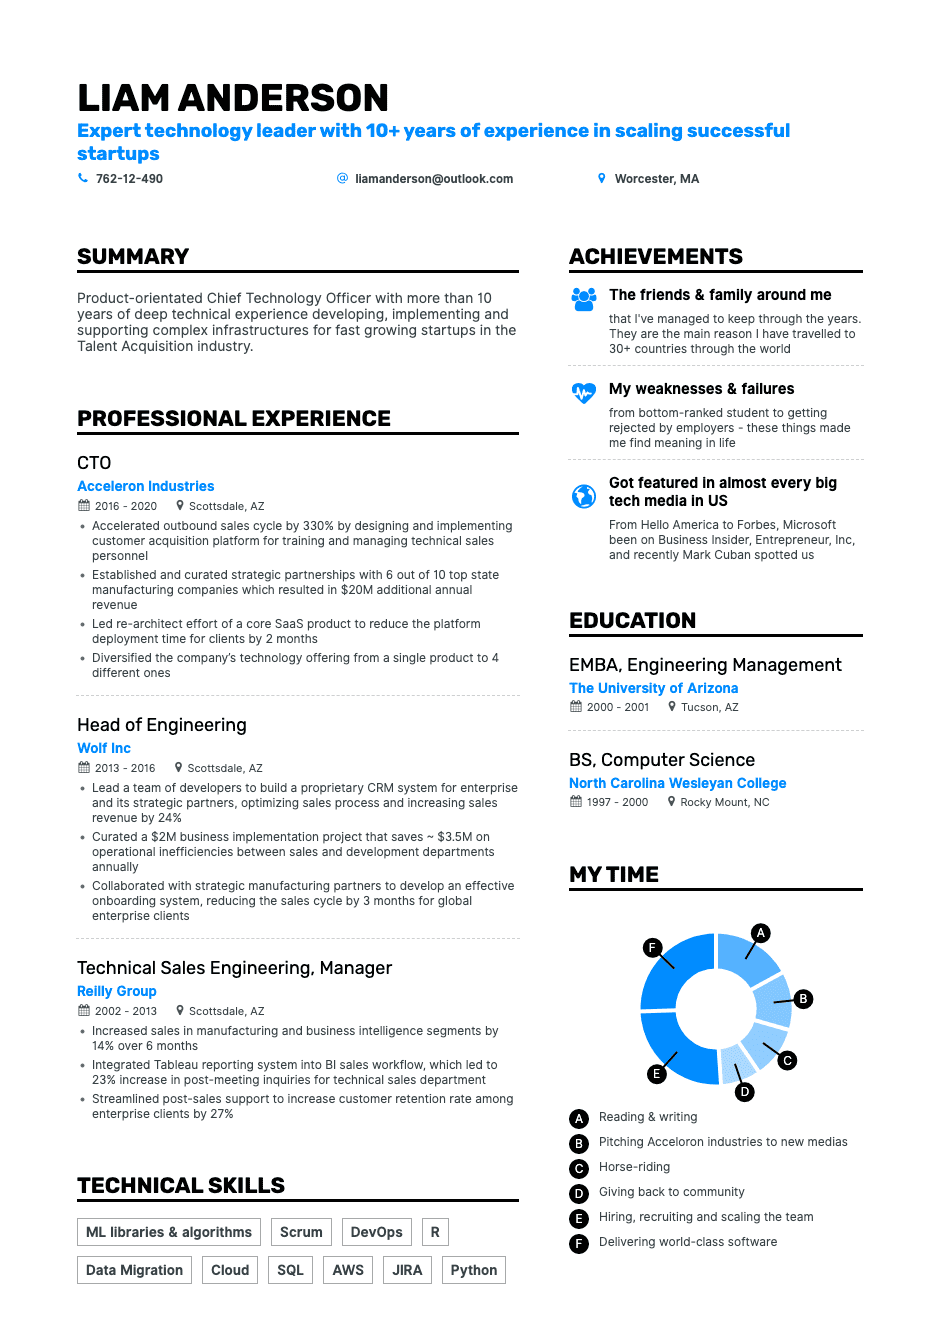 TwoColumn Resume Templates for 2021 Fit on One Page PDF & TXT